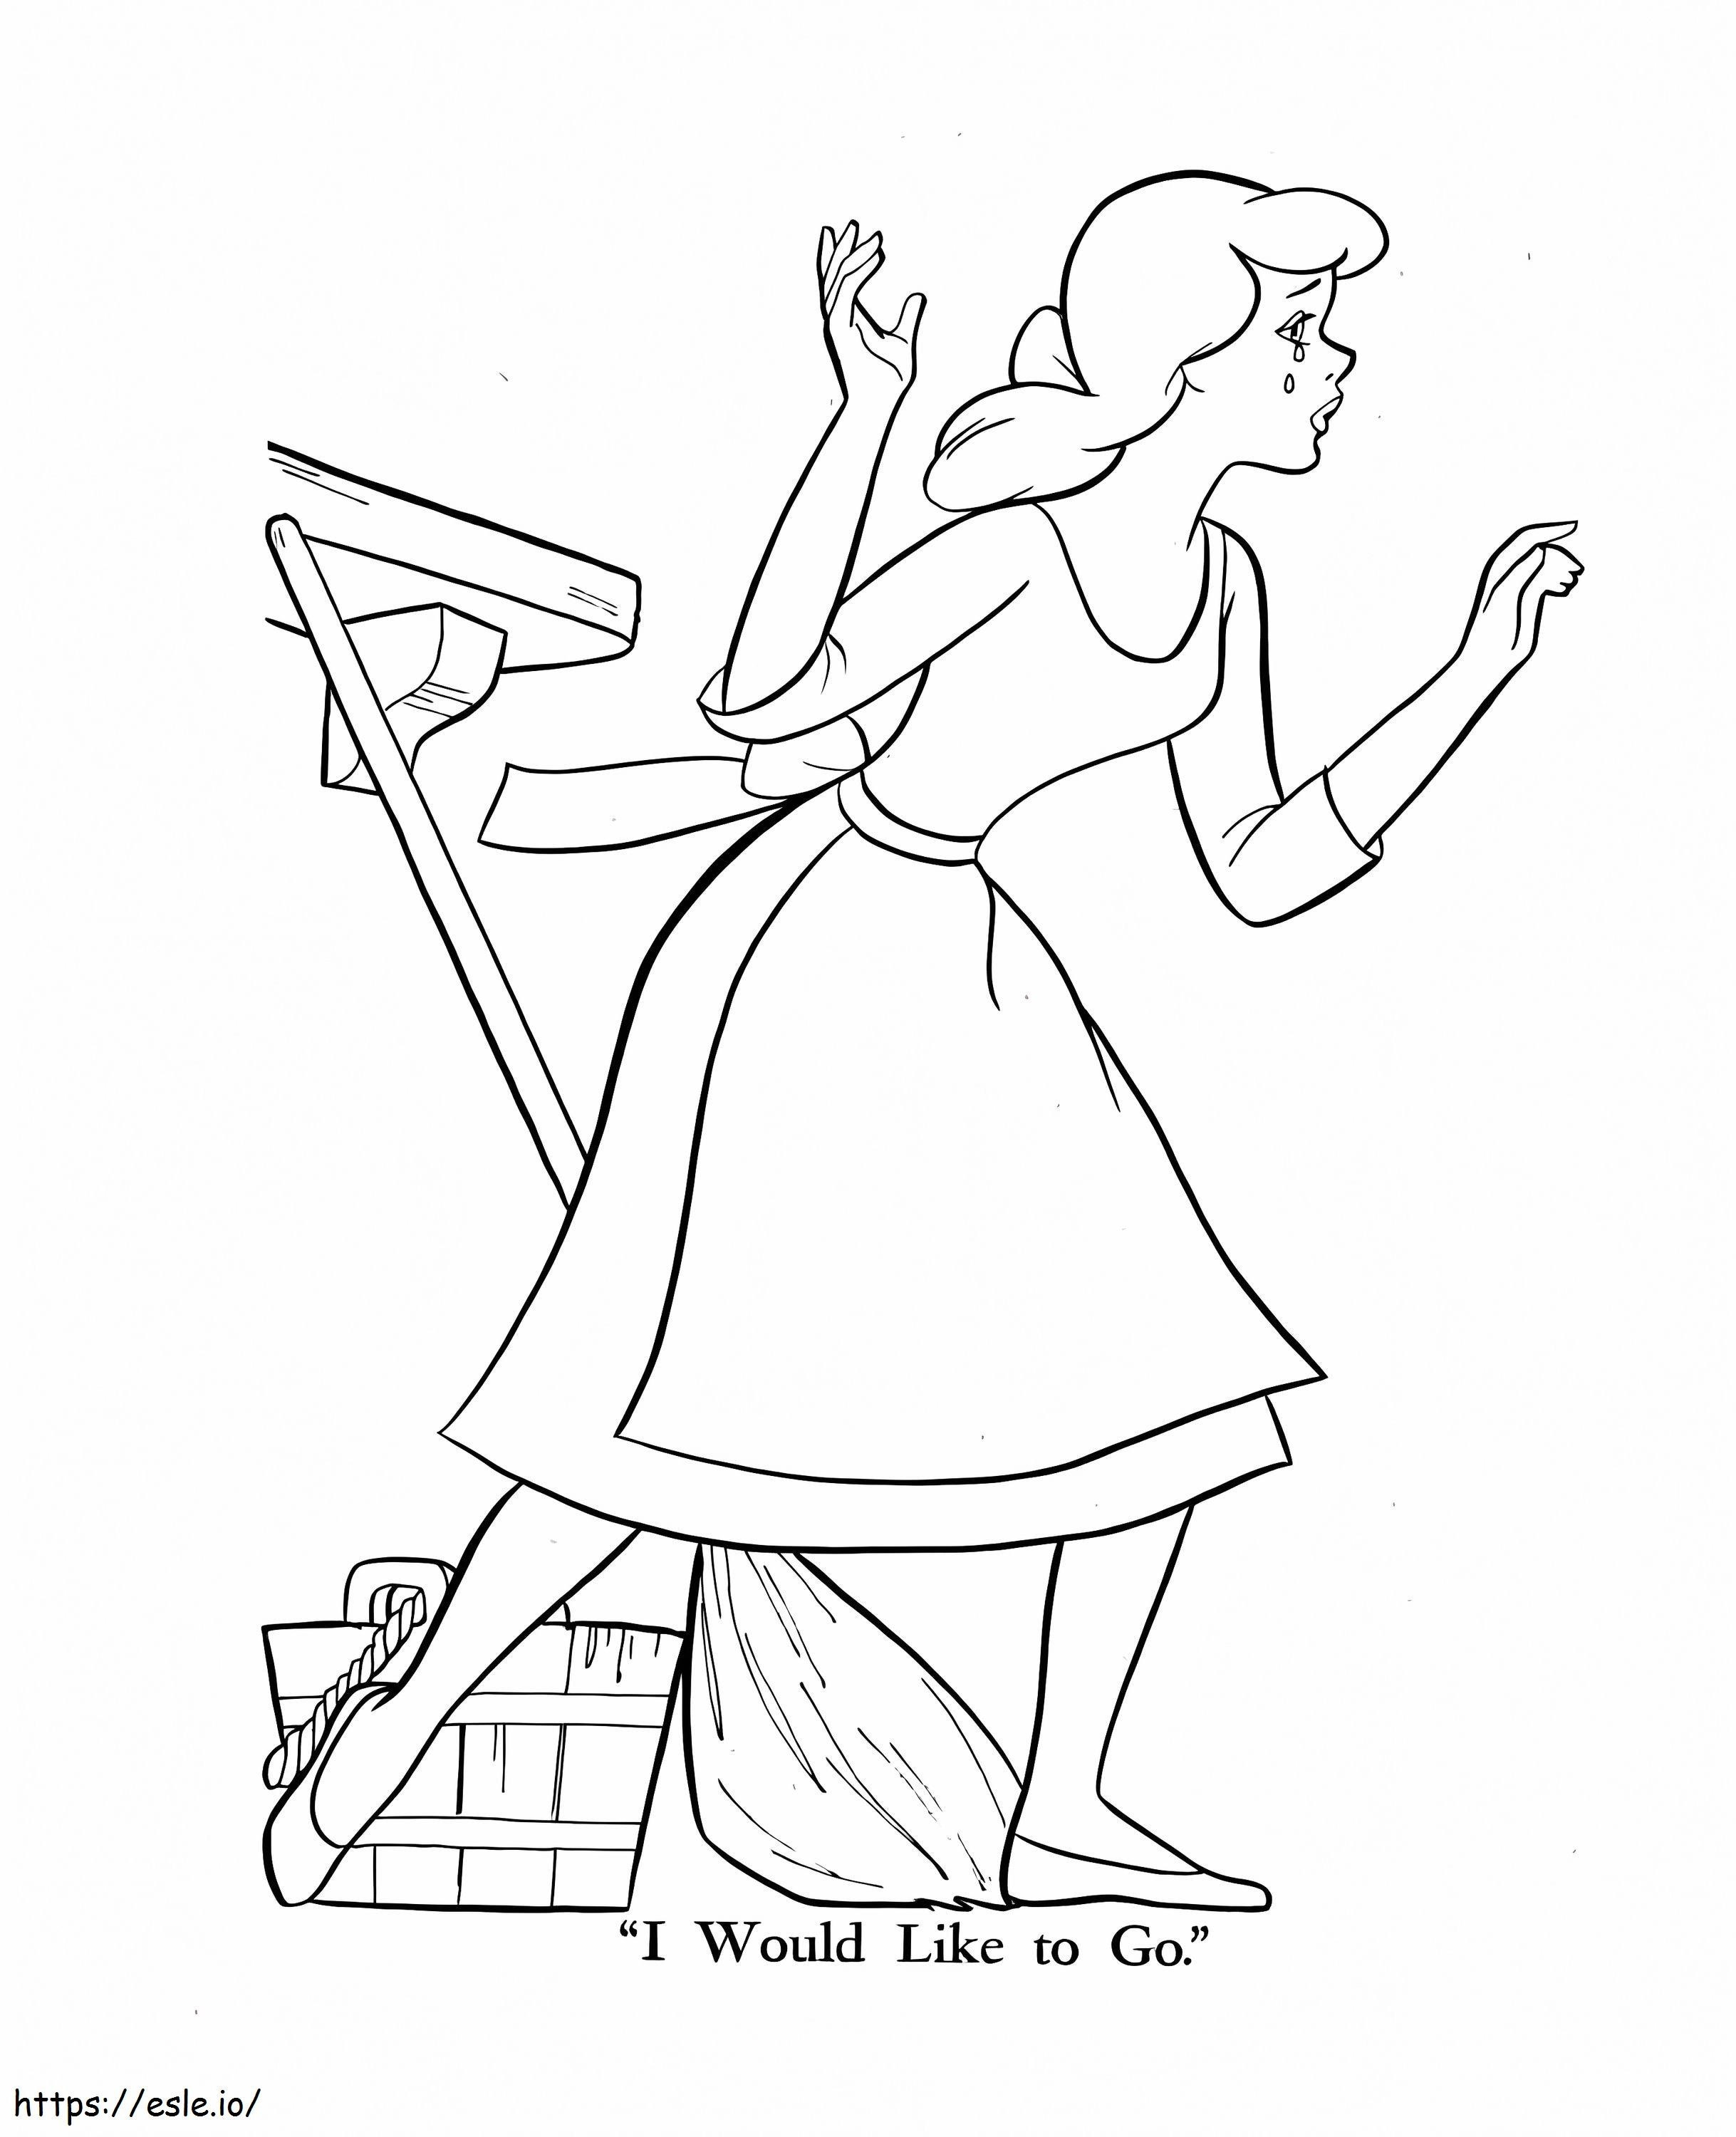 Cinderella Is Crying coloring page